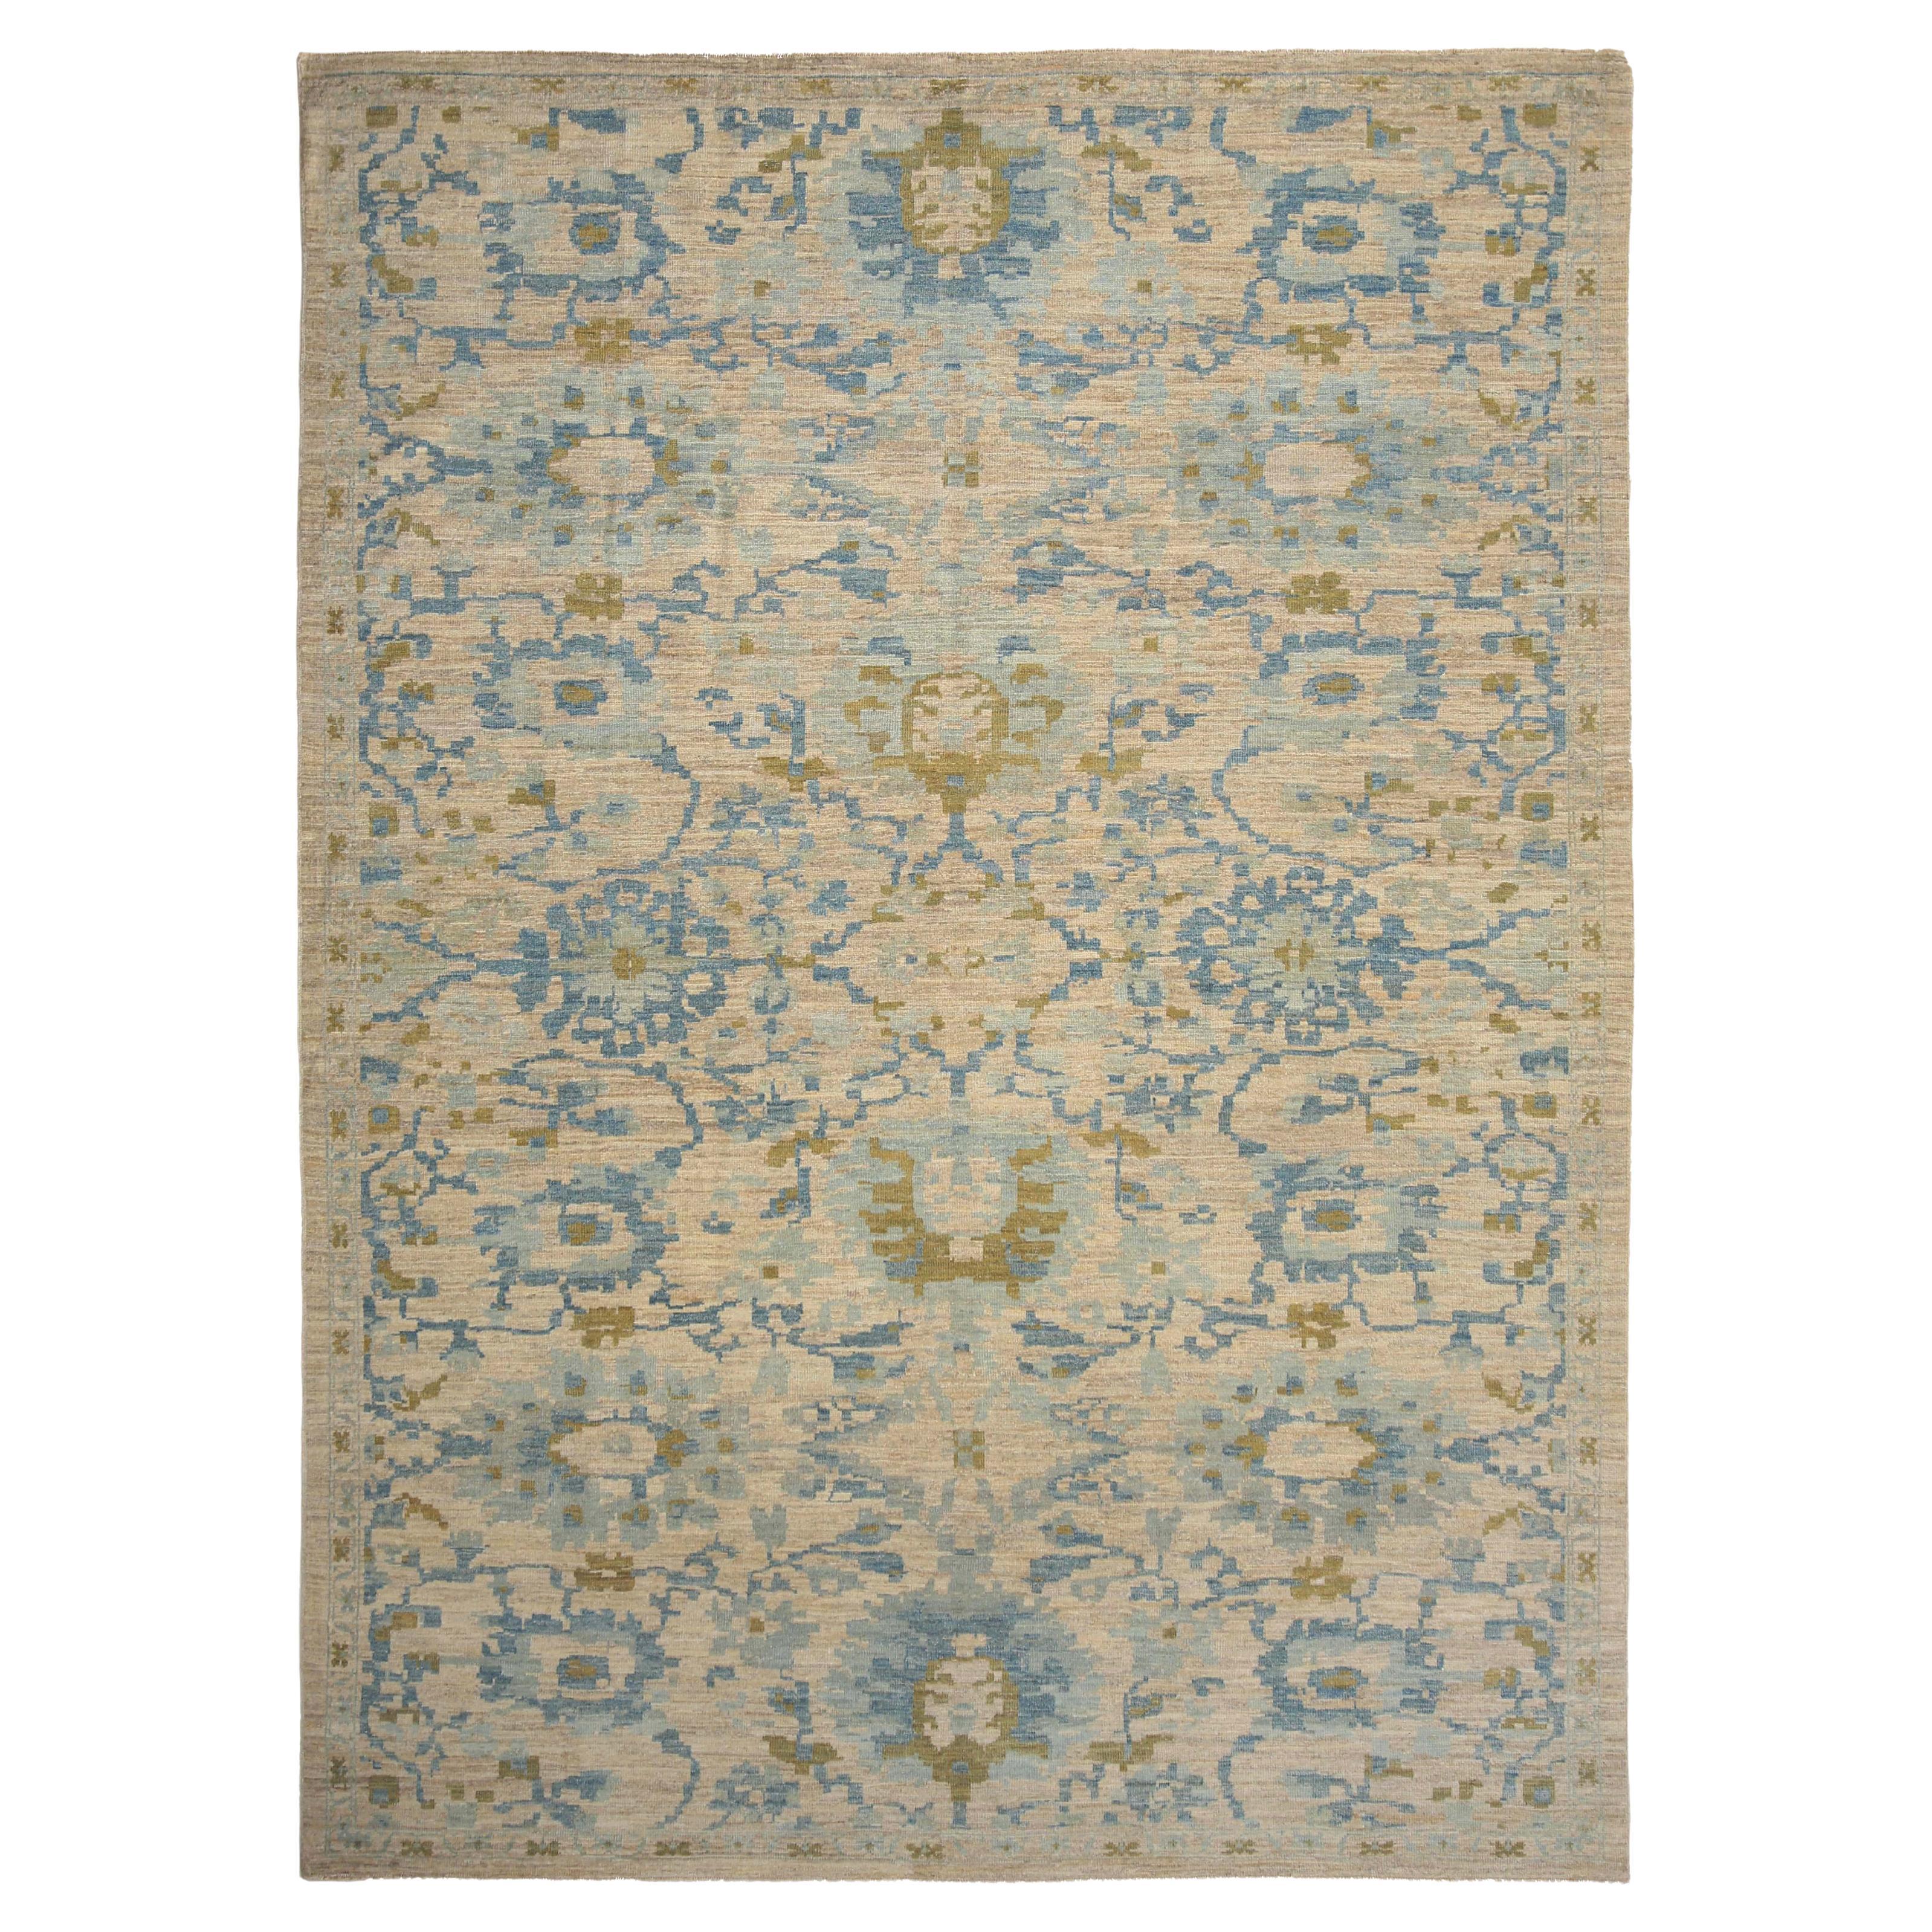 Luxurious Handmade Sultanabad Rug - Modern Design, Blue and Green Tones - 9'6'' 